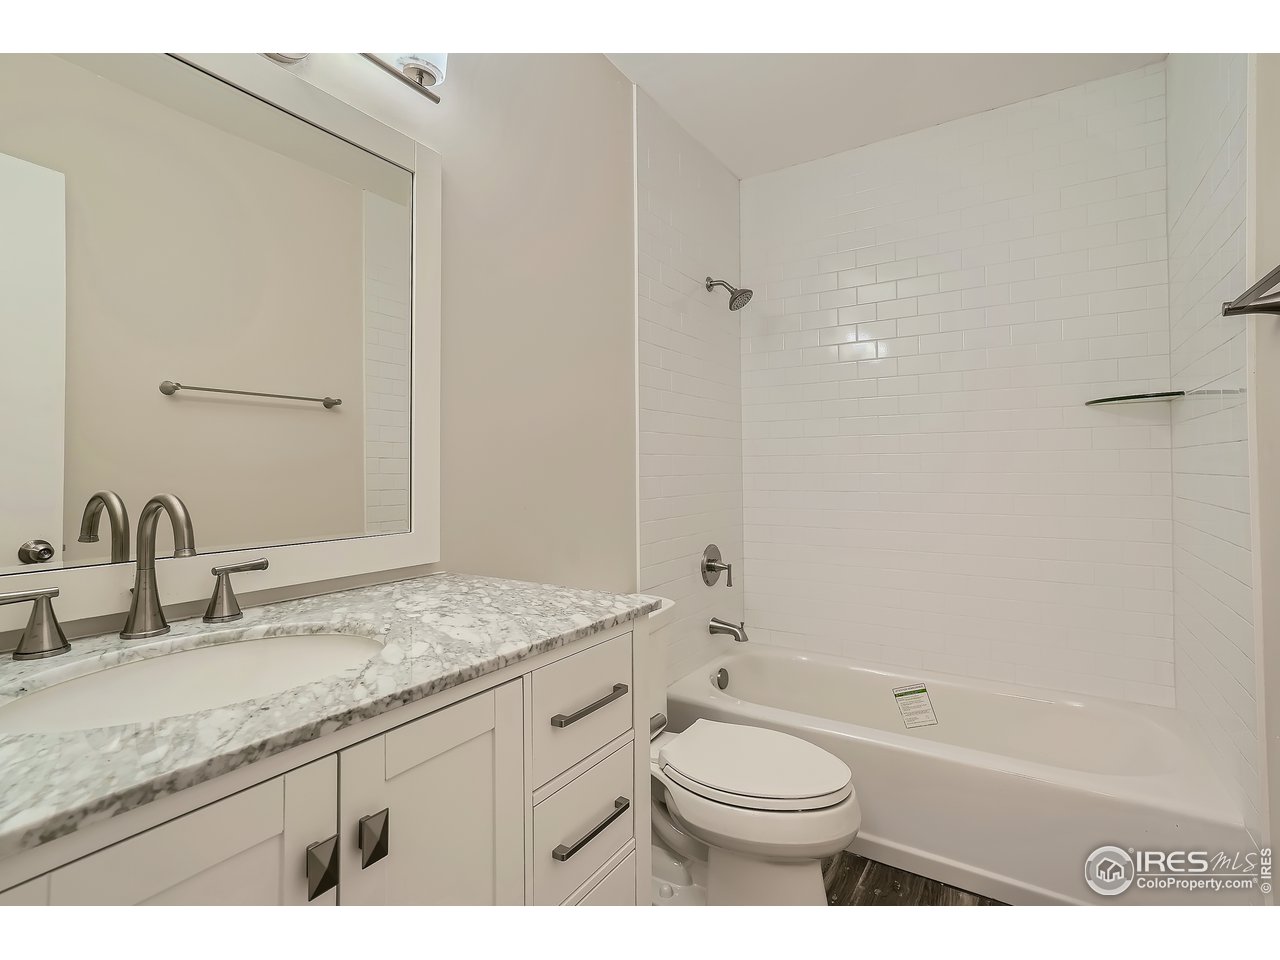 Completely renovated bathroom